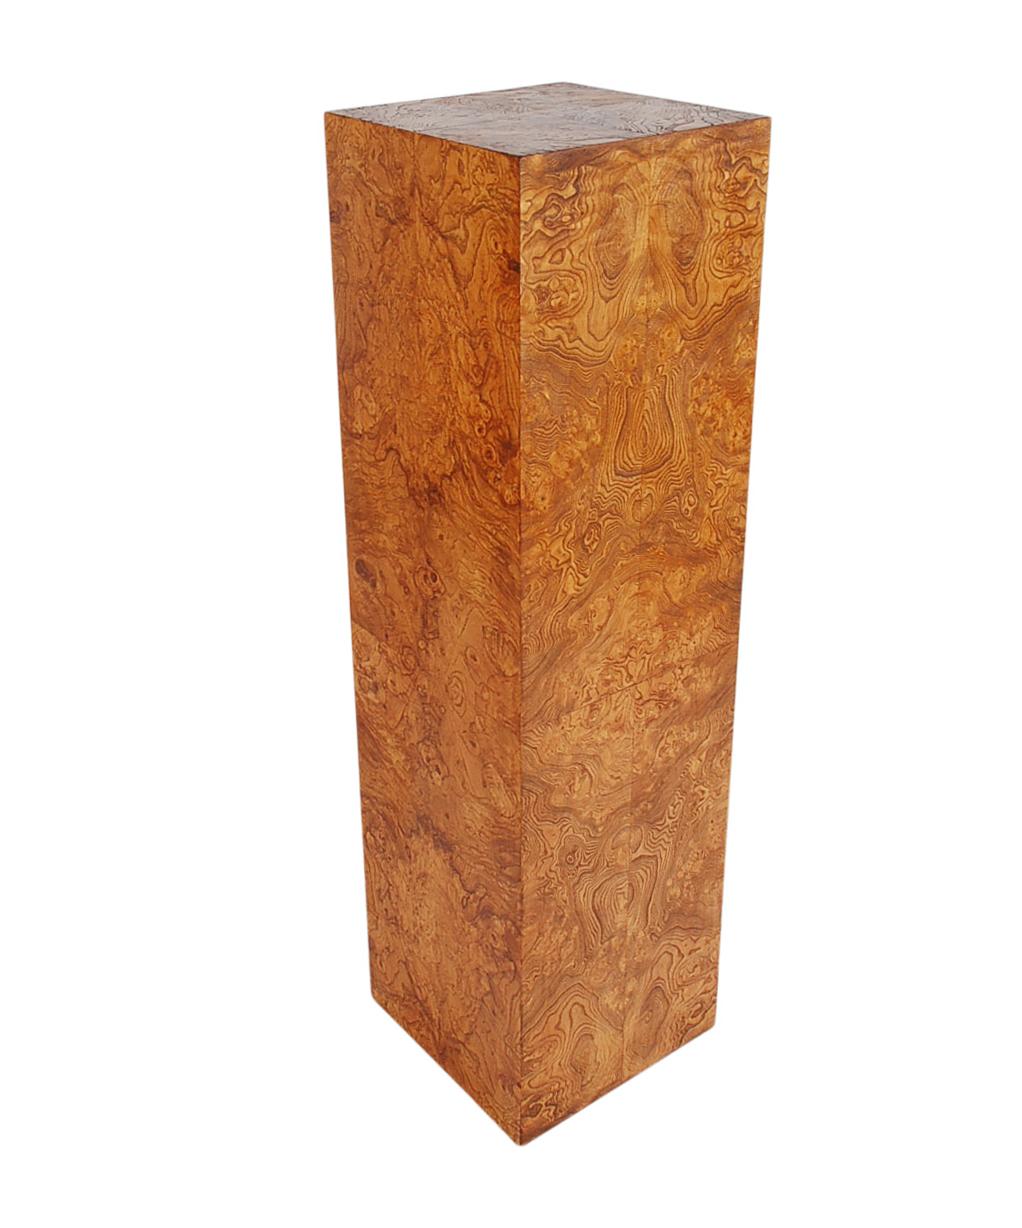 American Mid-Century Modern Olive Burl Square Pedestal or Display Table by Milo Baughman 